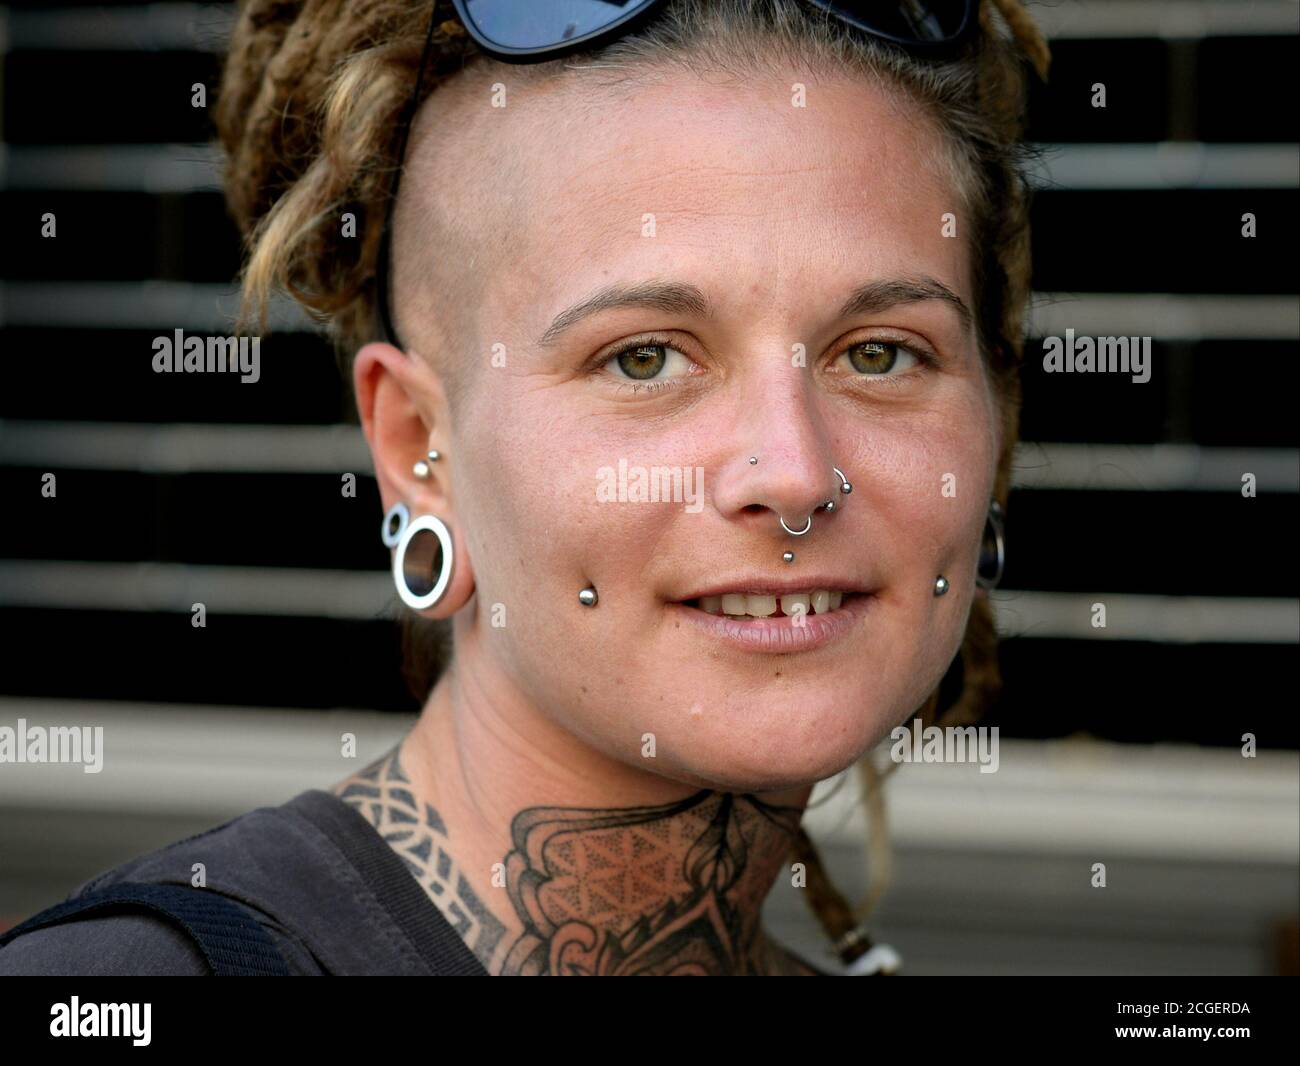 Young Caucasian woman with facial piercings, tattoos and dreadlocks poses for the camera. Stock Photo